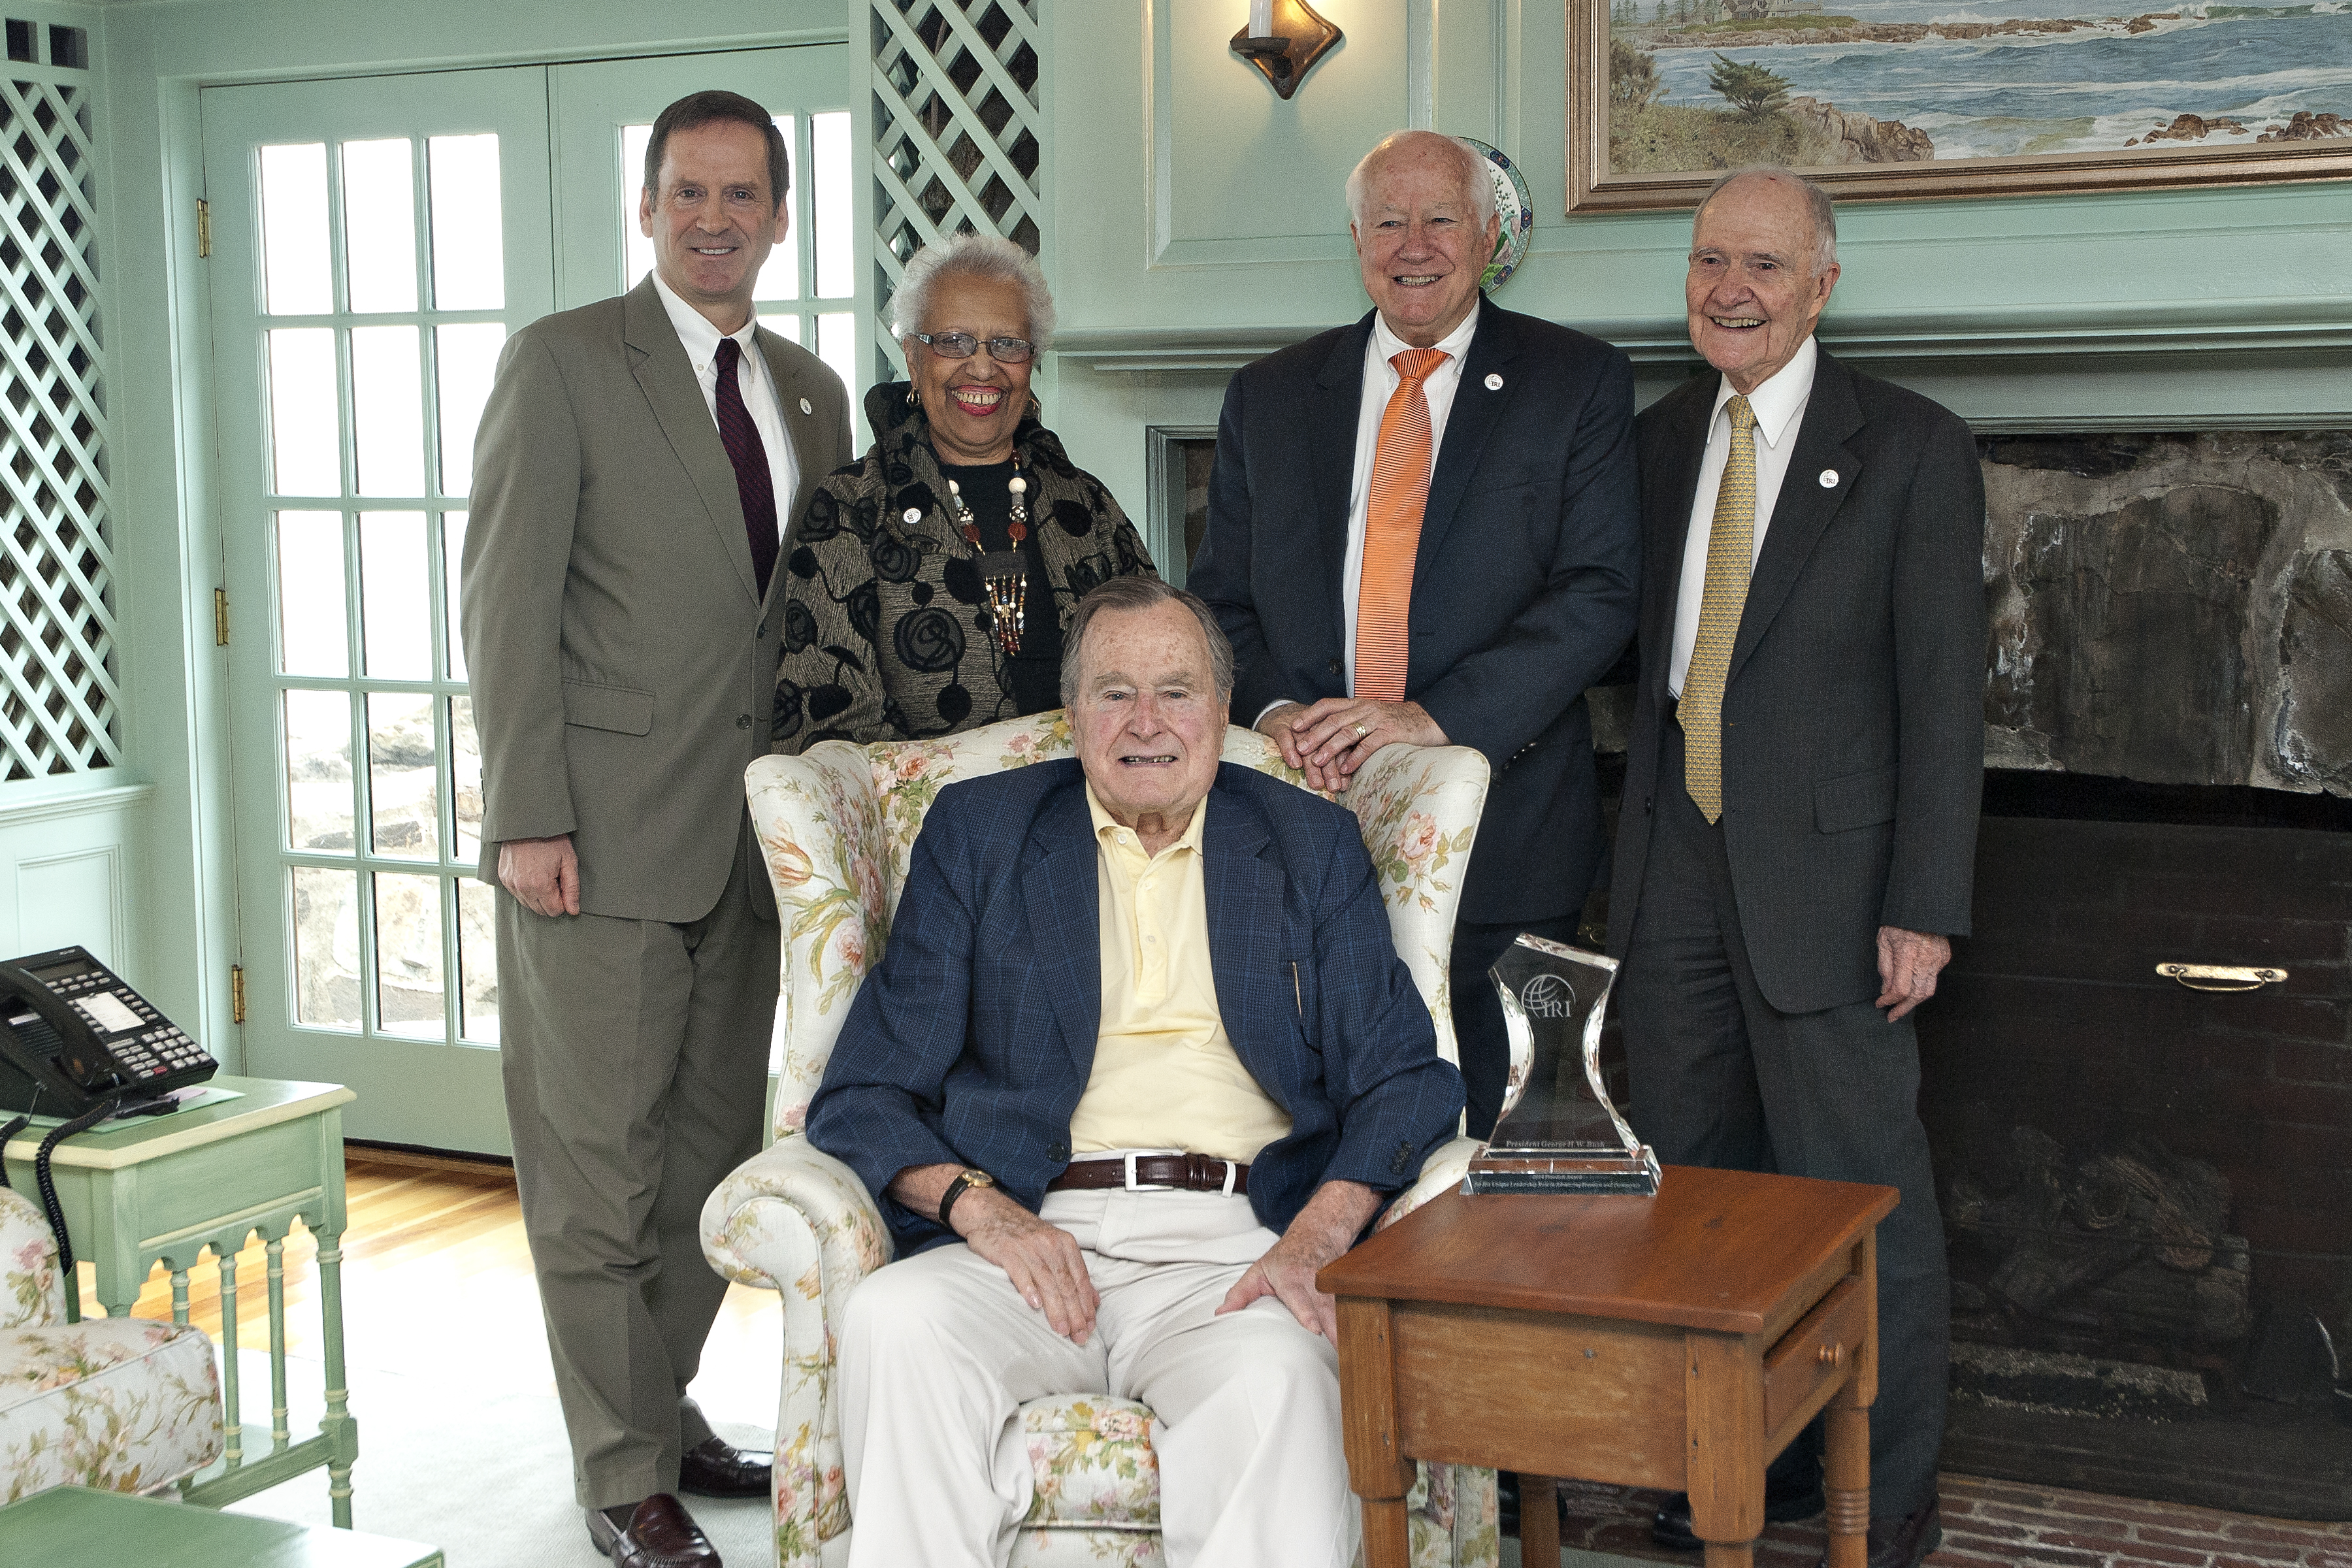 Members of IRI’s Board of Directors and Ambassador Green present President George H.W. Bush the Freedom Award on May 19 at his home in Kennebunkport, Maine.